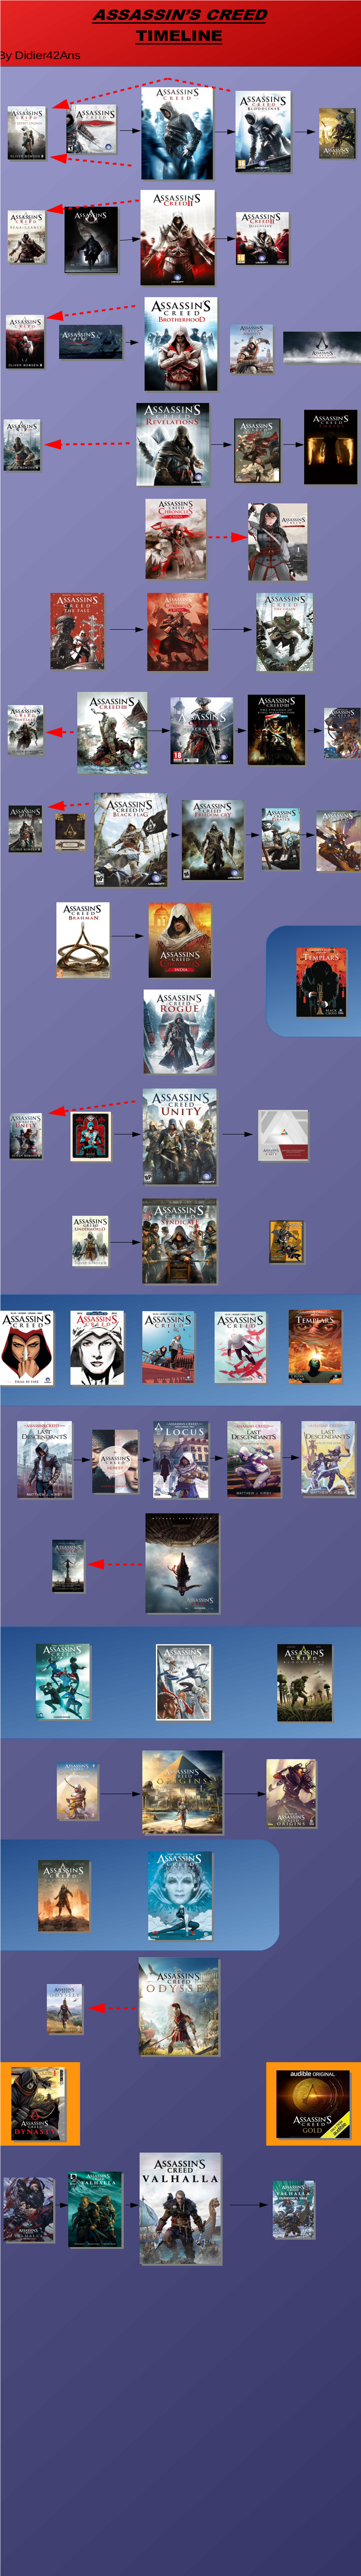 How to Play the Assassin's Creed Games in Chronological Order